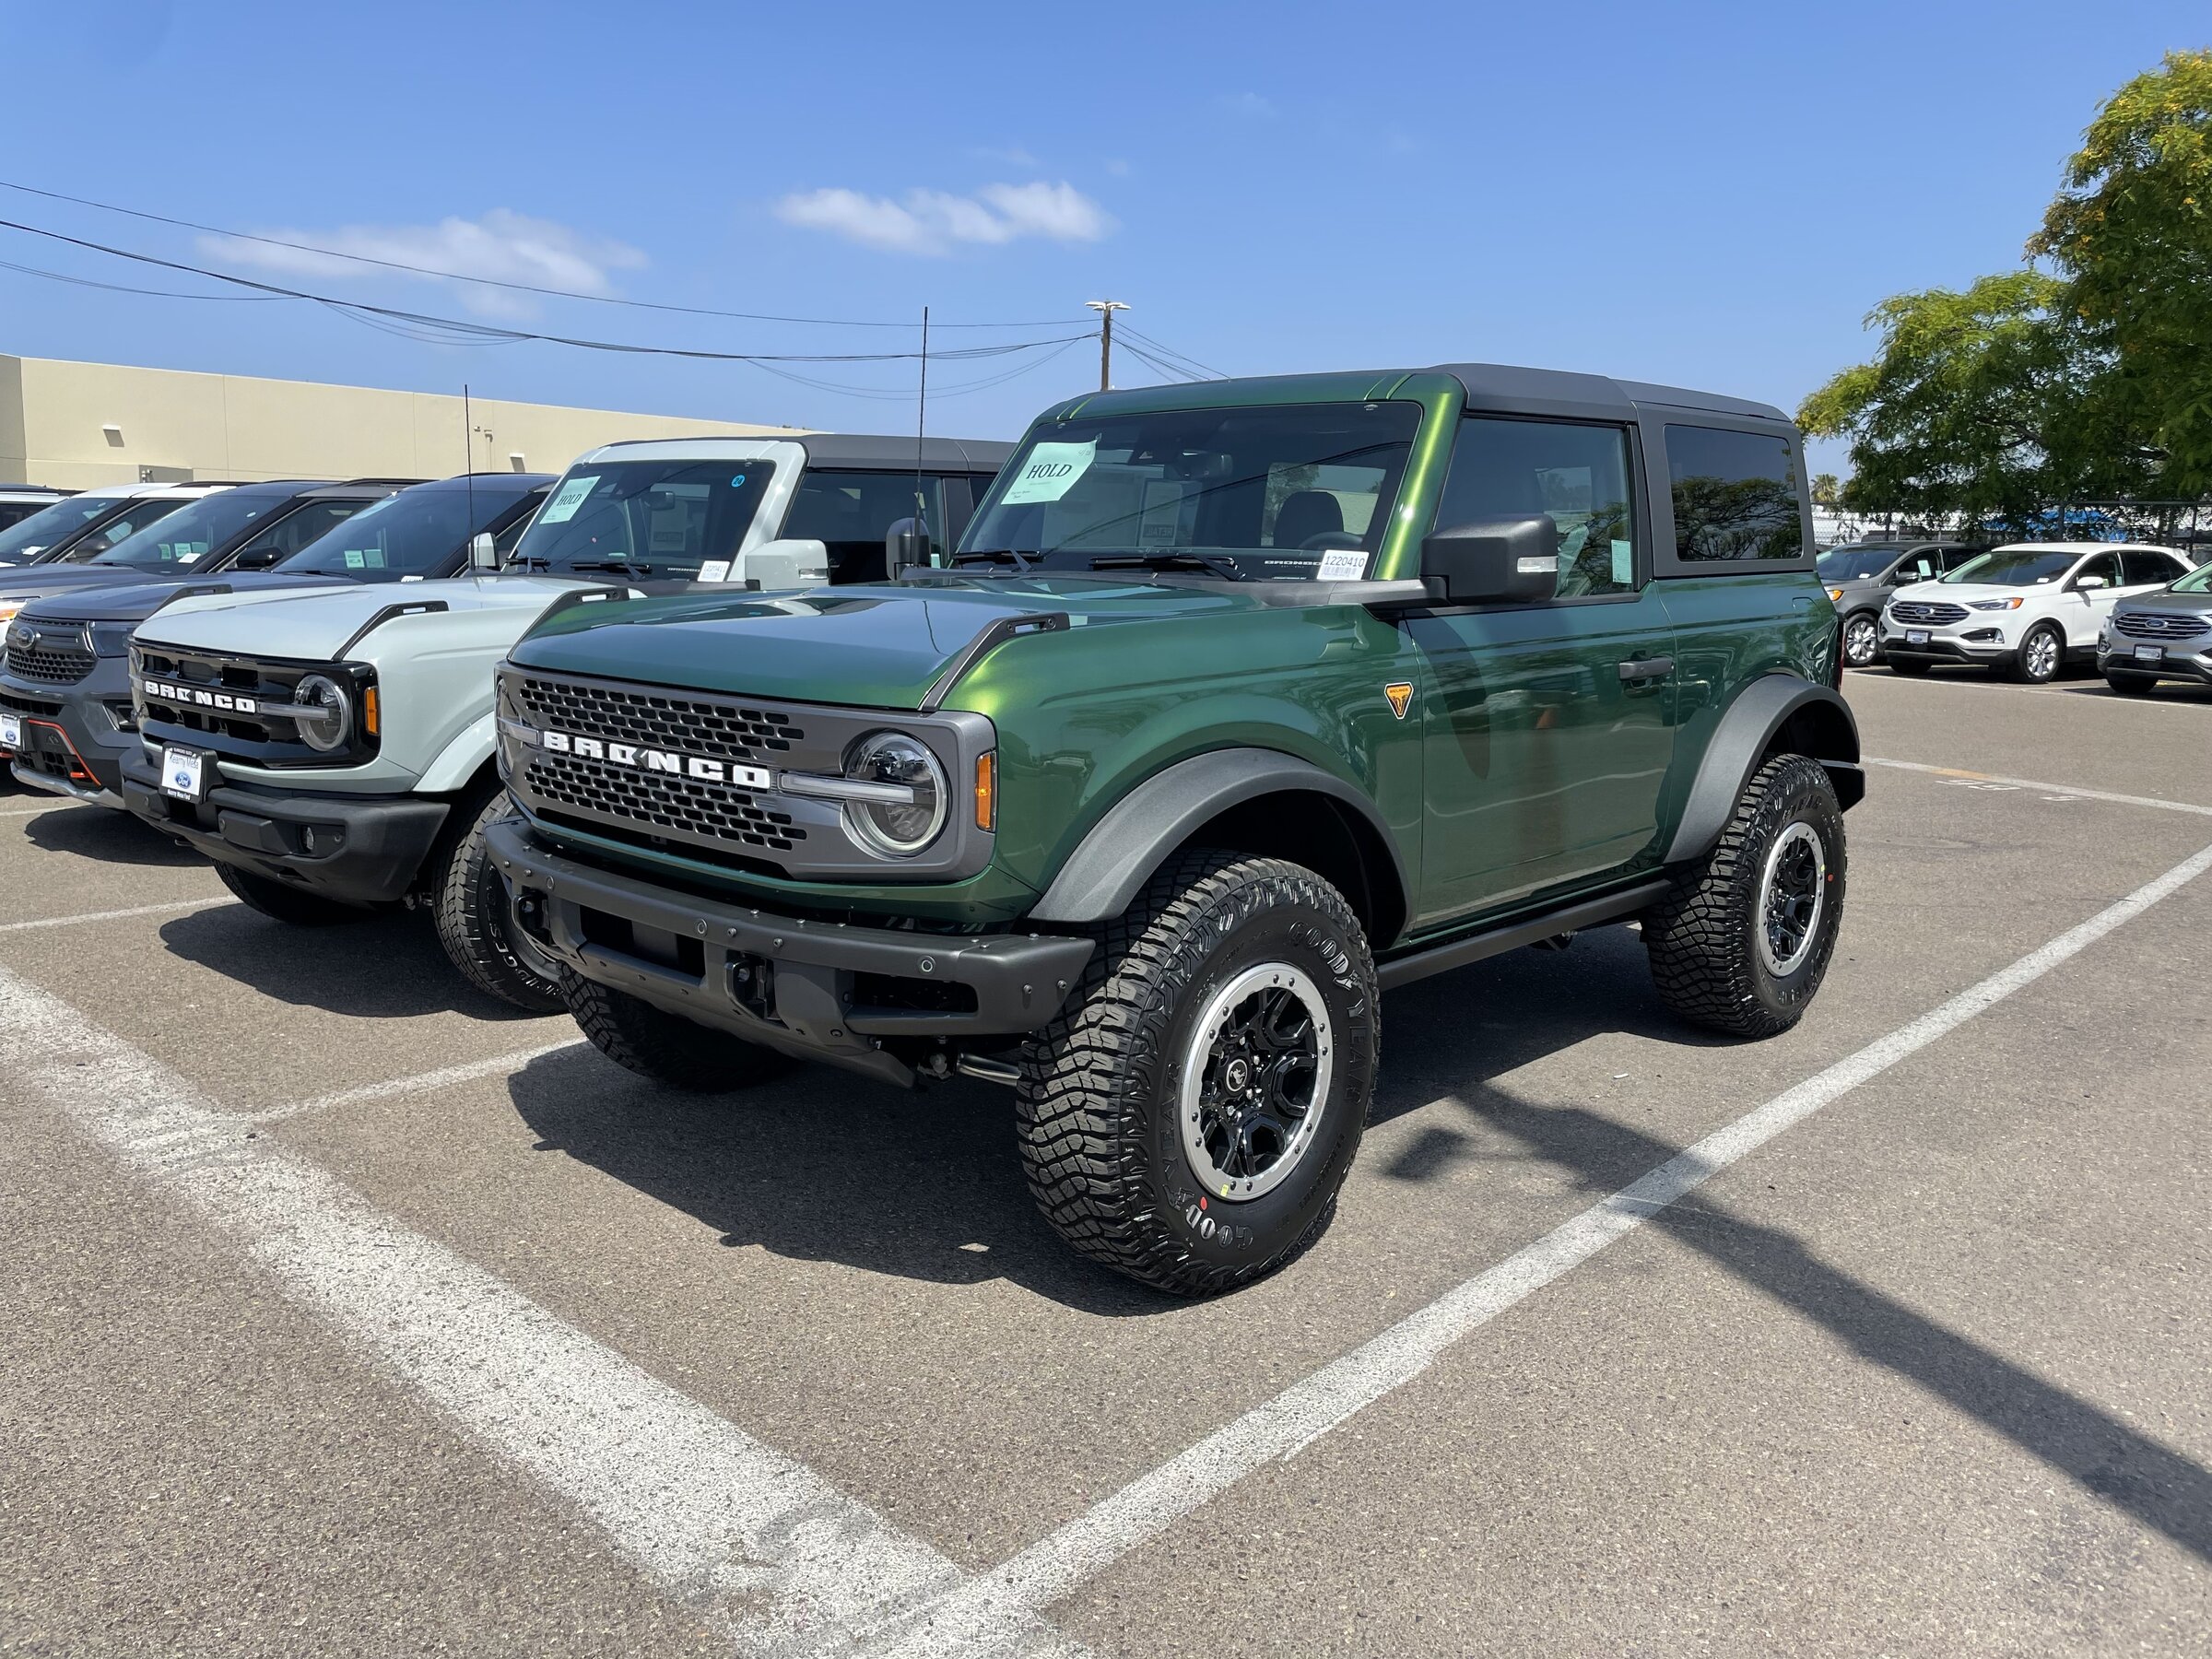 Ford Bronco A point of contact for SoCal buyers - Kearny Mesa Ford 03359AED-63A2-481F-9183-E32A35D9E6D8